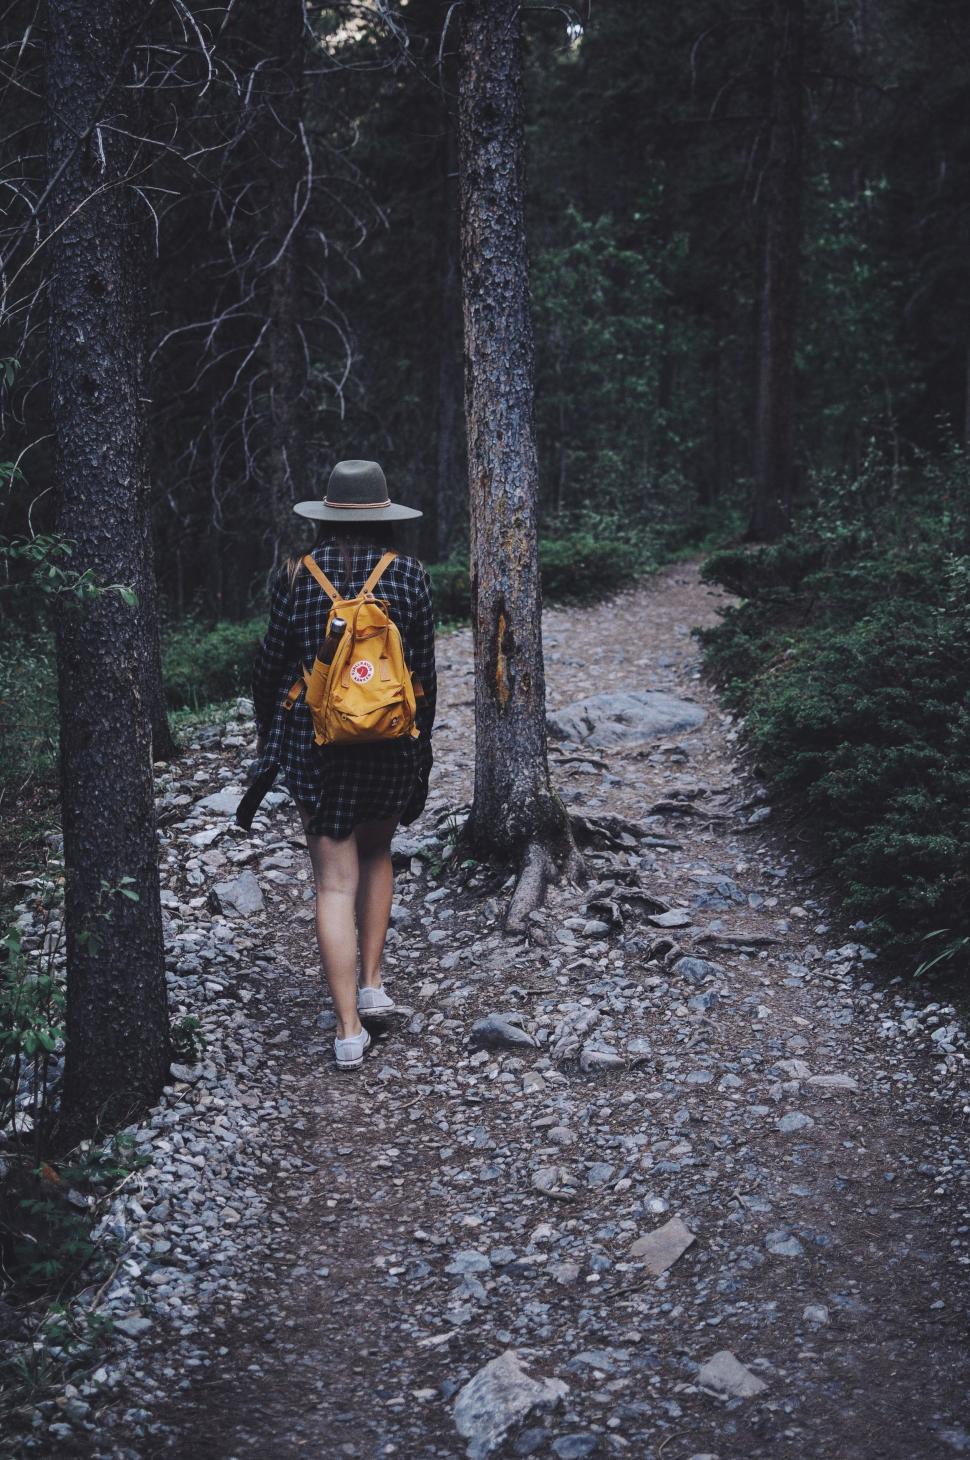 Free Image of Person Walking Down Trail in Woods 